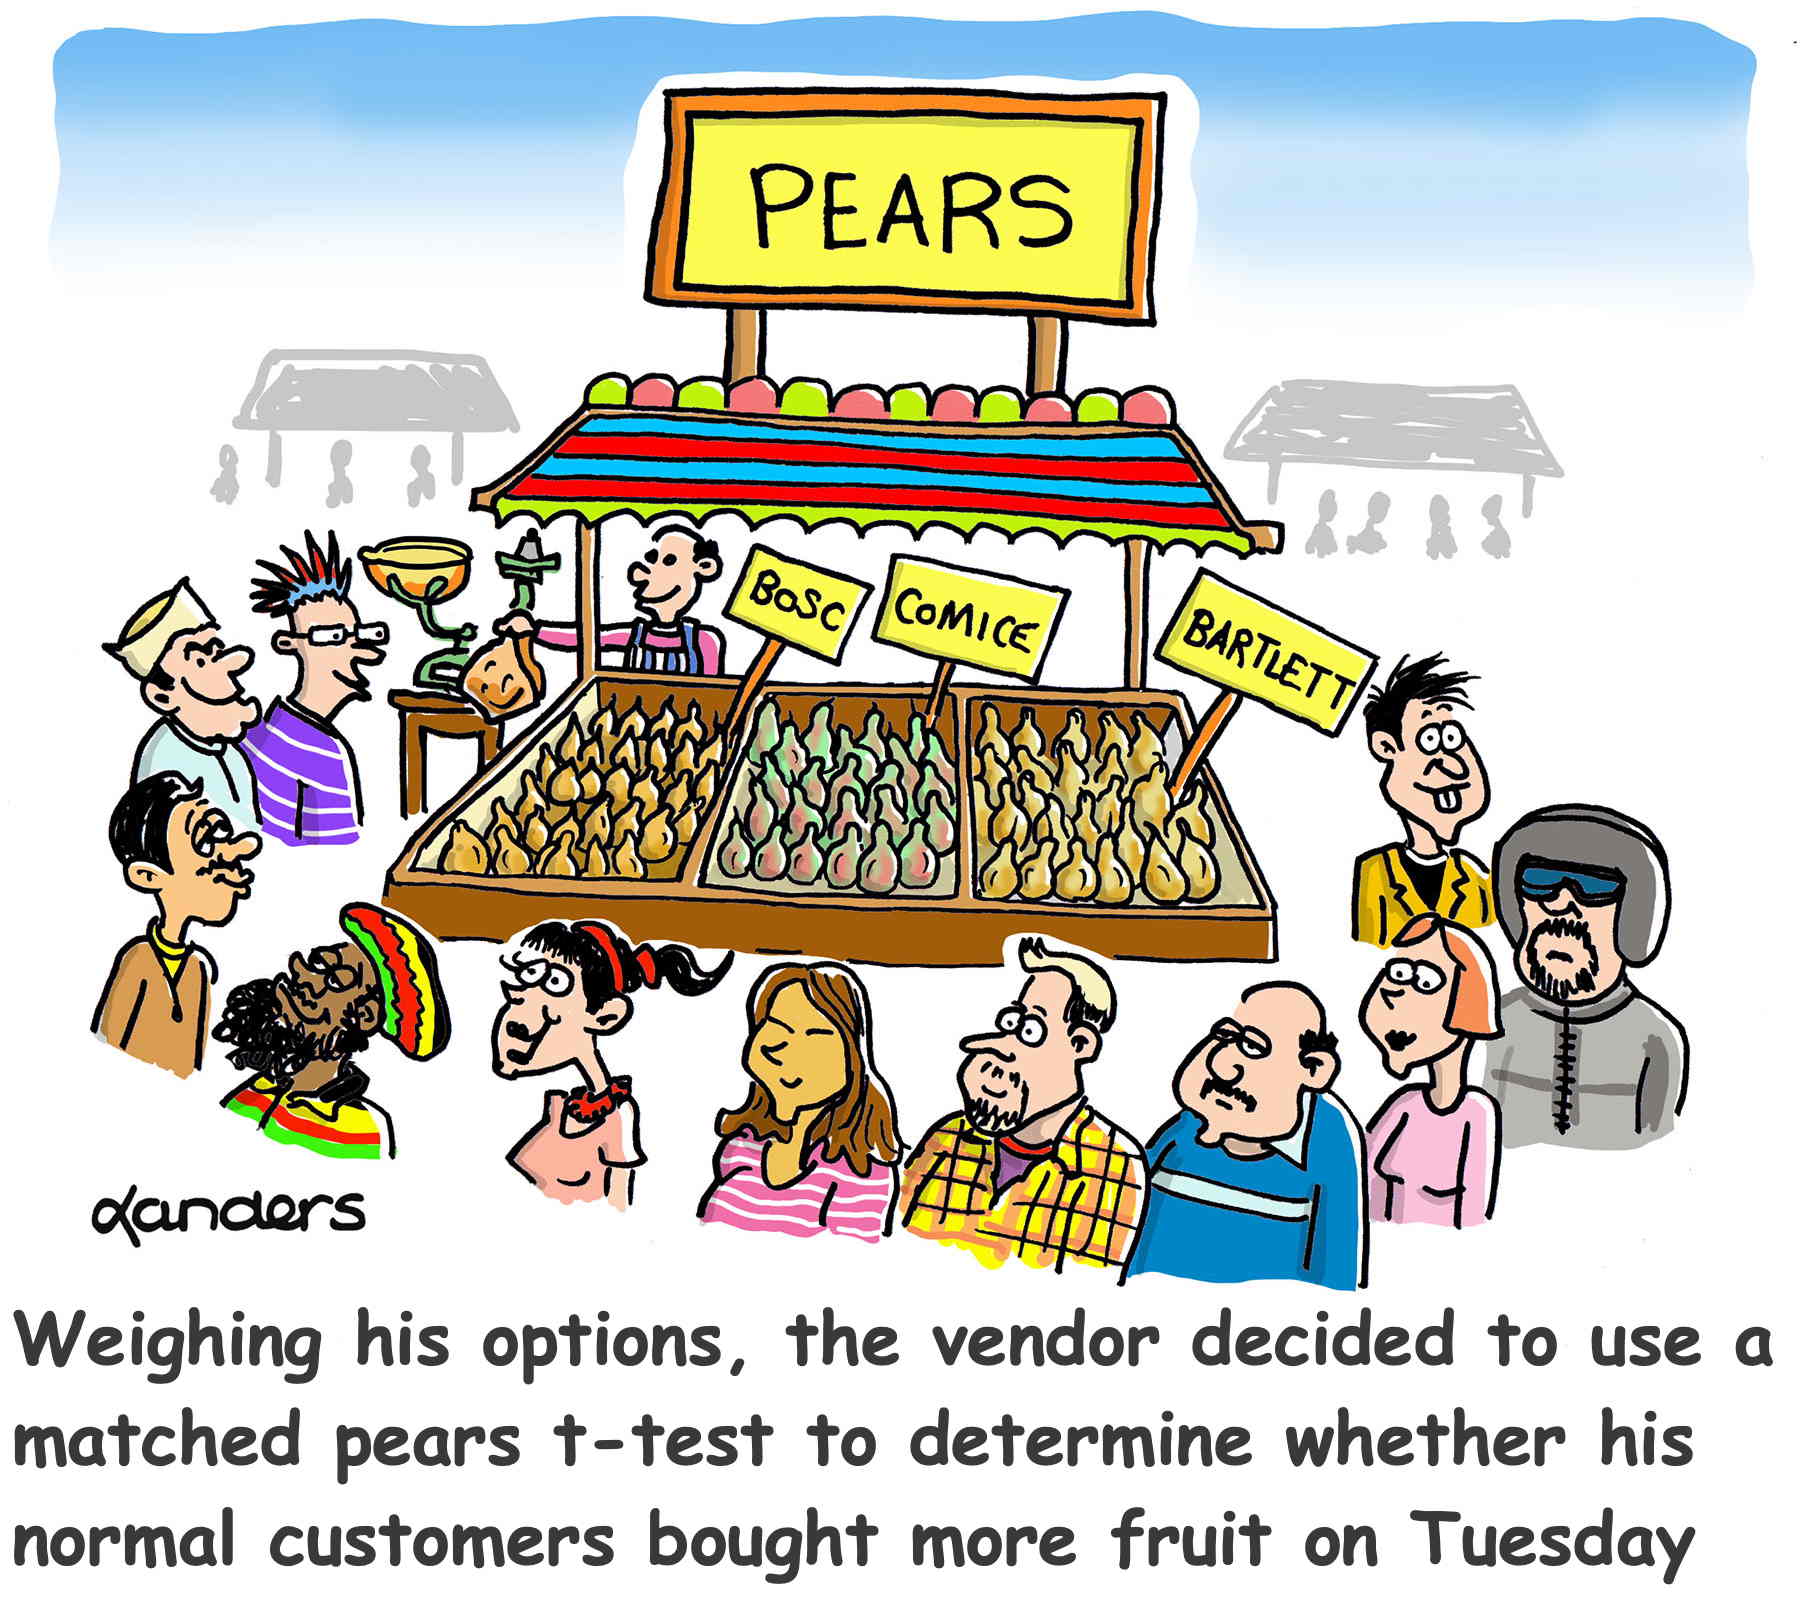 cartoon of people lined up to buy pears at a fruit stand. Caption says:"Weighing his options, the vendor decided to use a matched pears t-test to determine whether his normal customers bought more fruit on Tuesday"